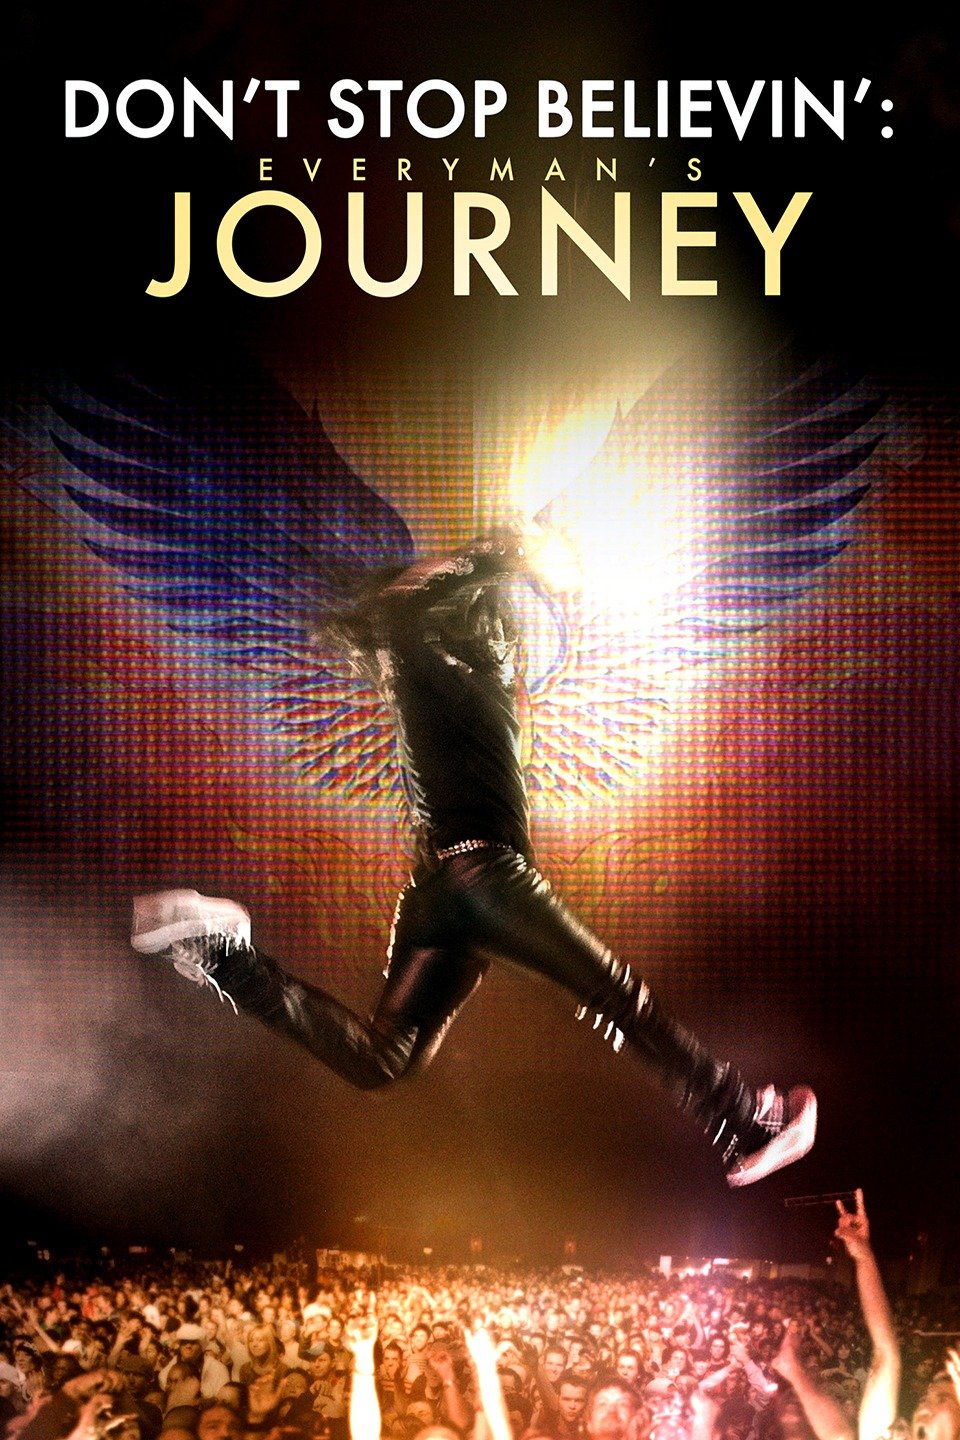 journey don't stop believing in movies